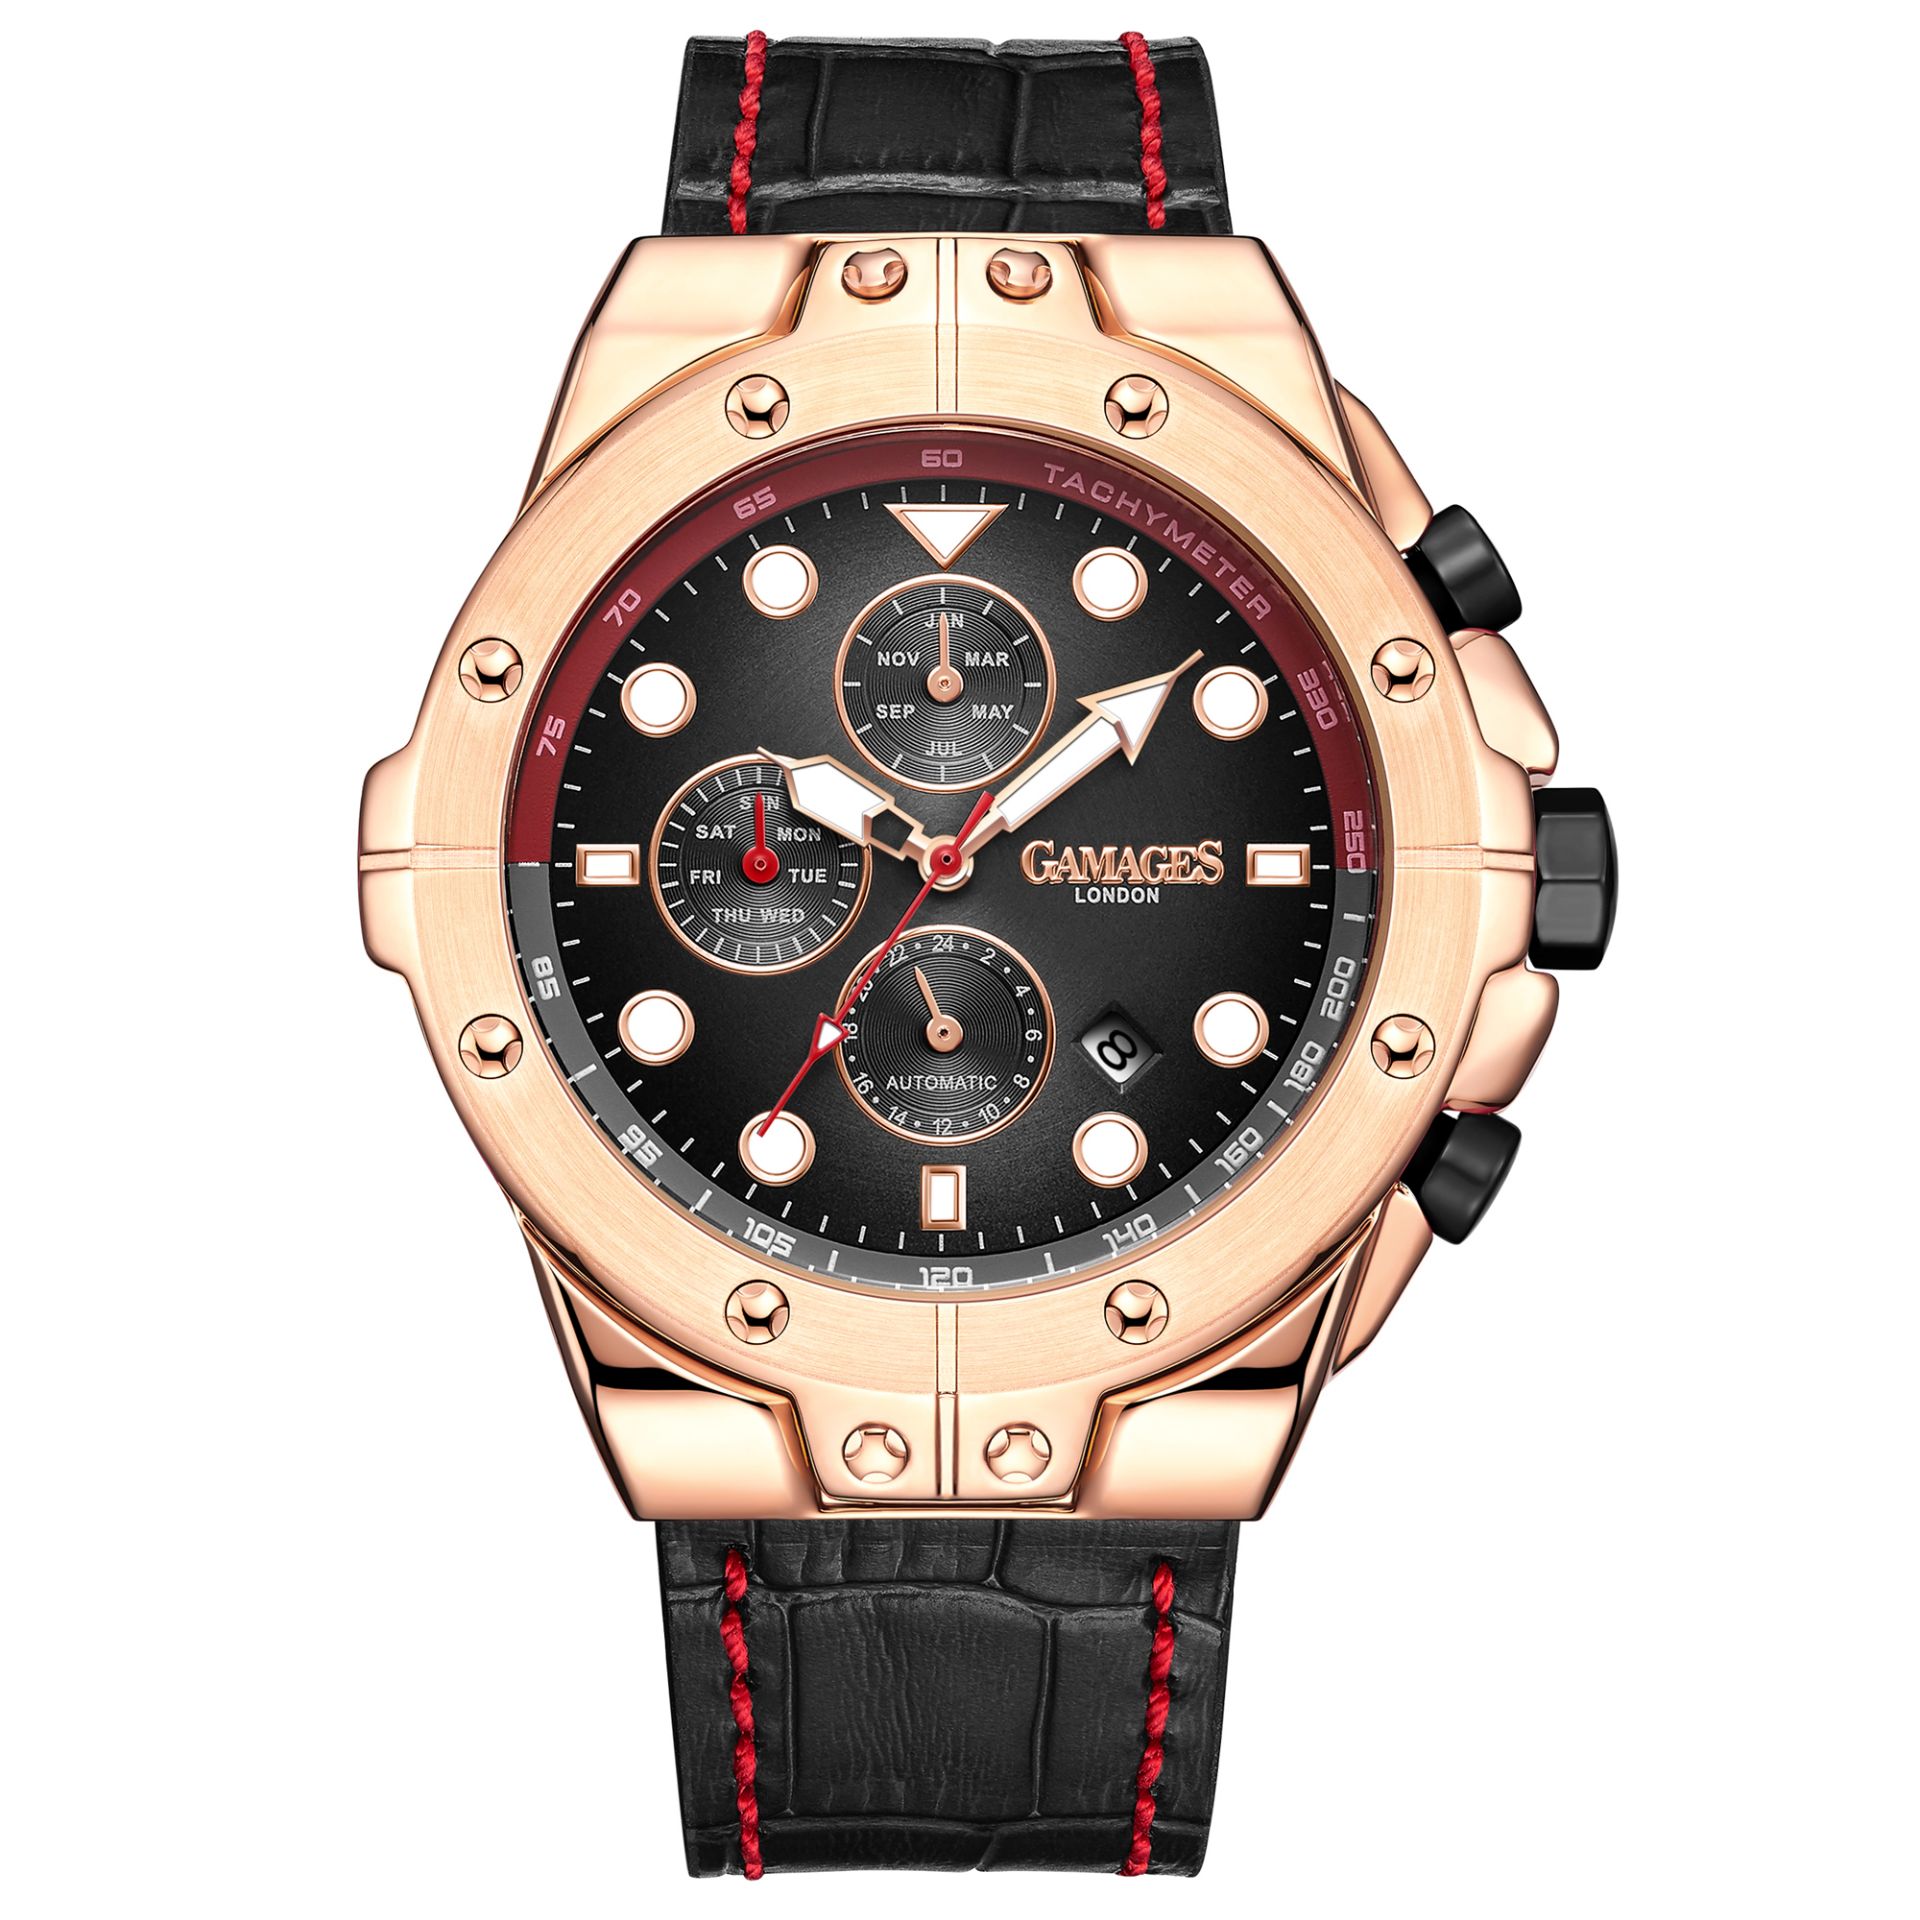 Limited Edition Hand Assembled Gamages Vessel Automatic Black – 5 Year Warranty & Free Delivery